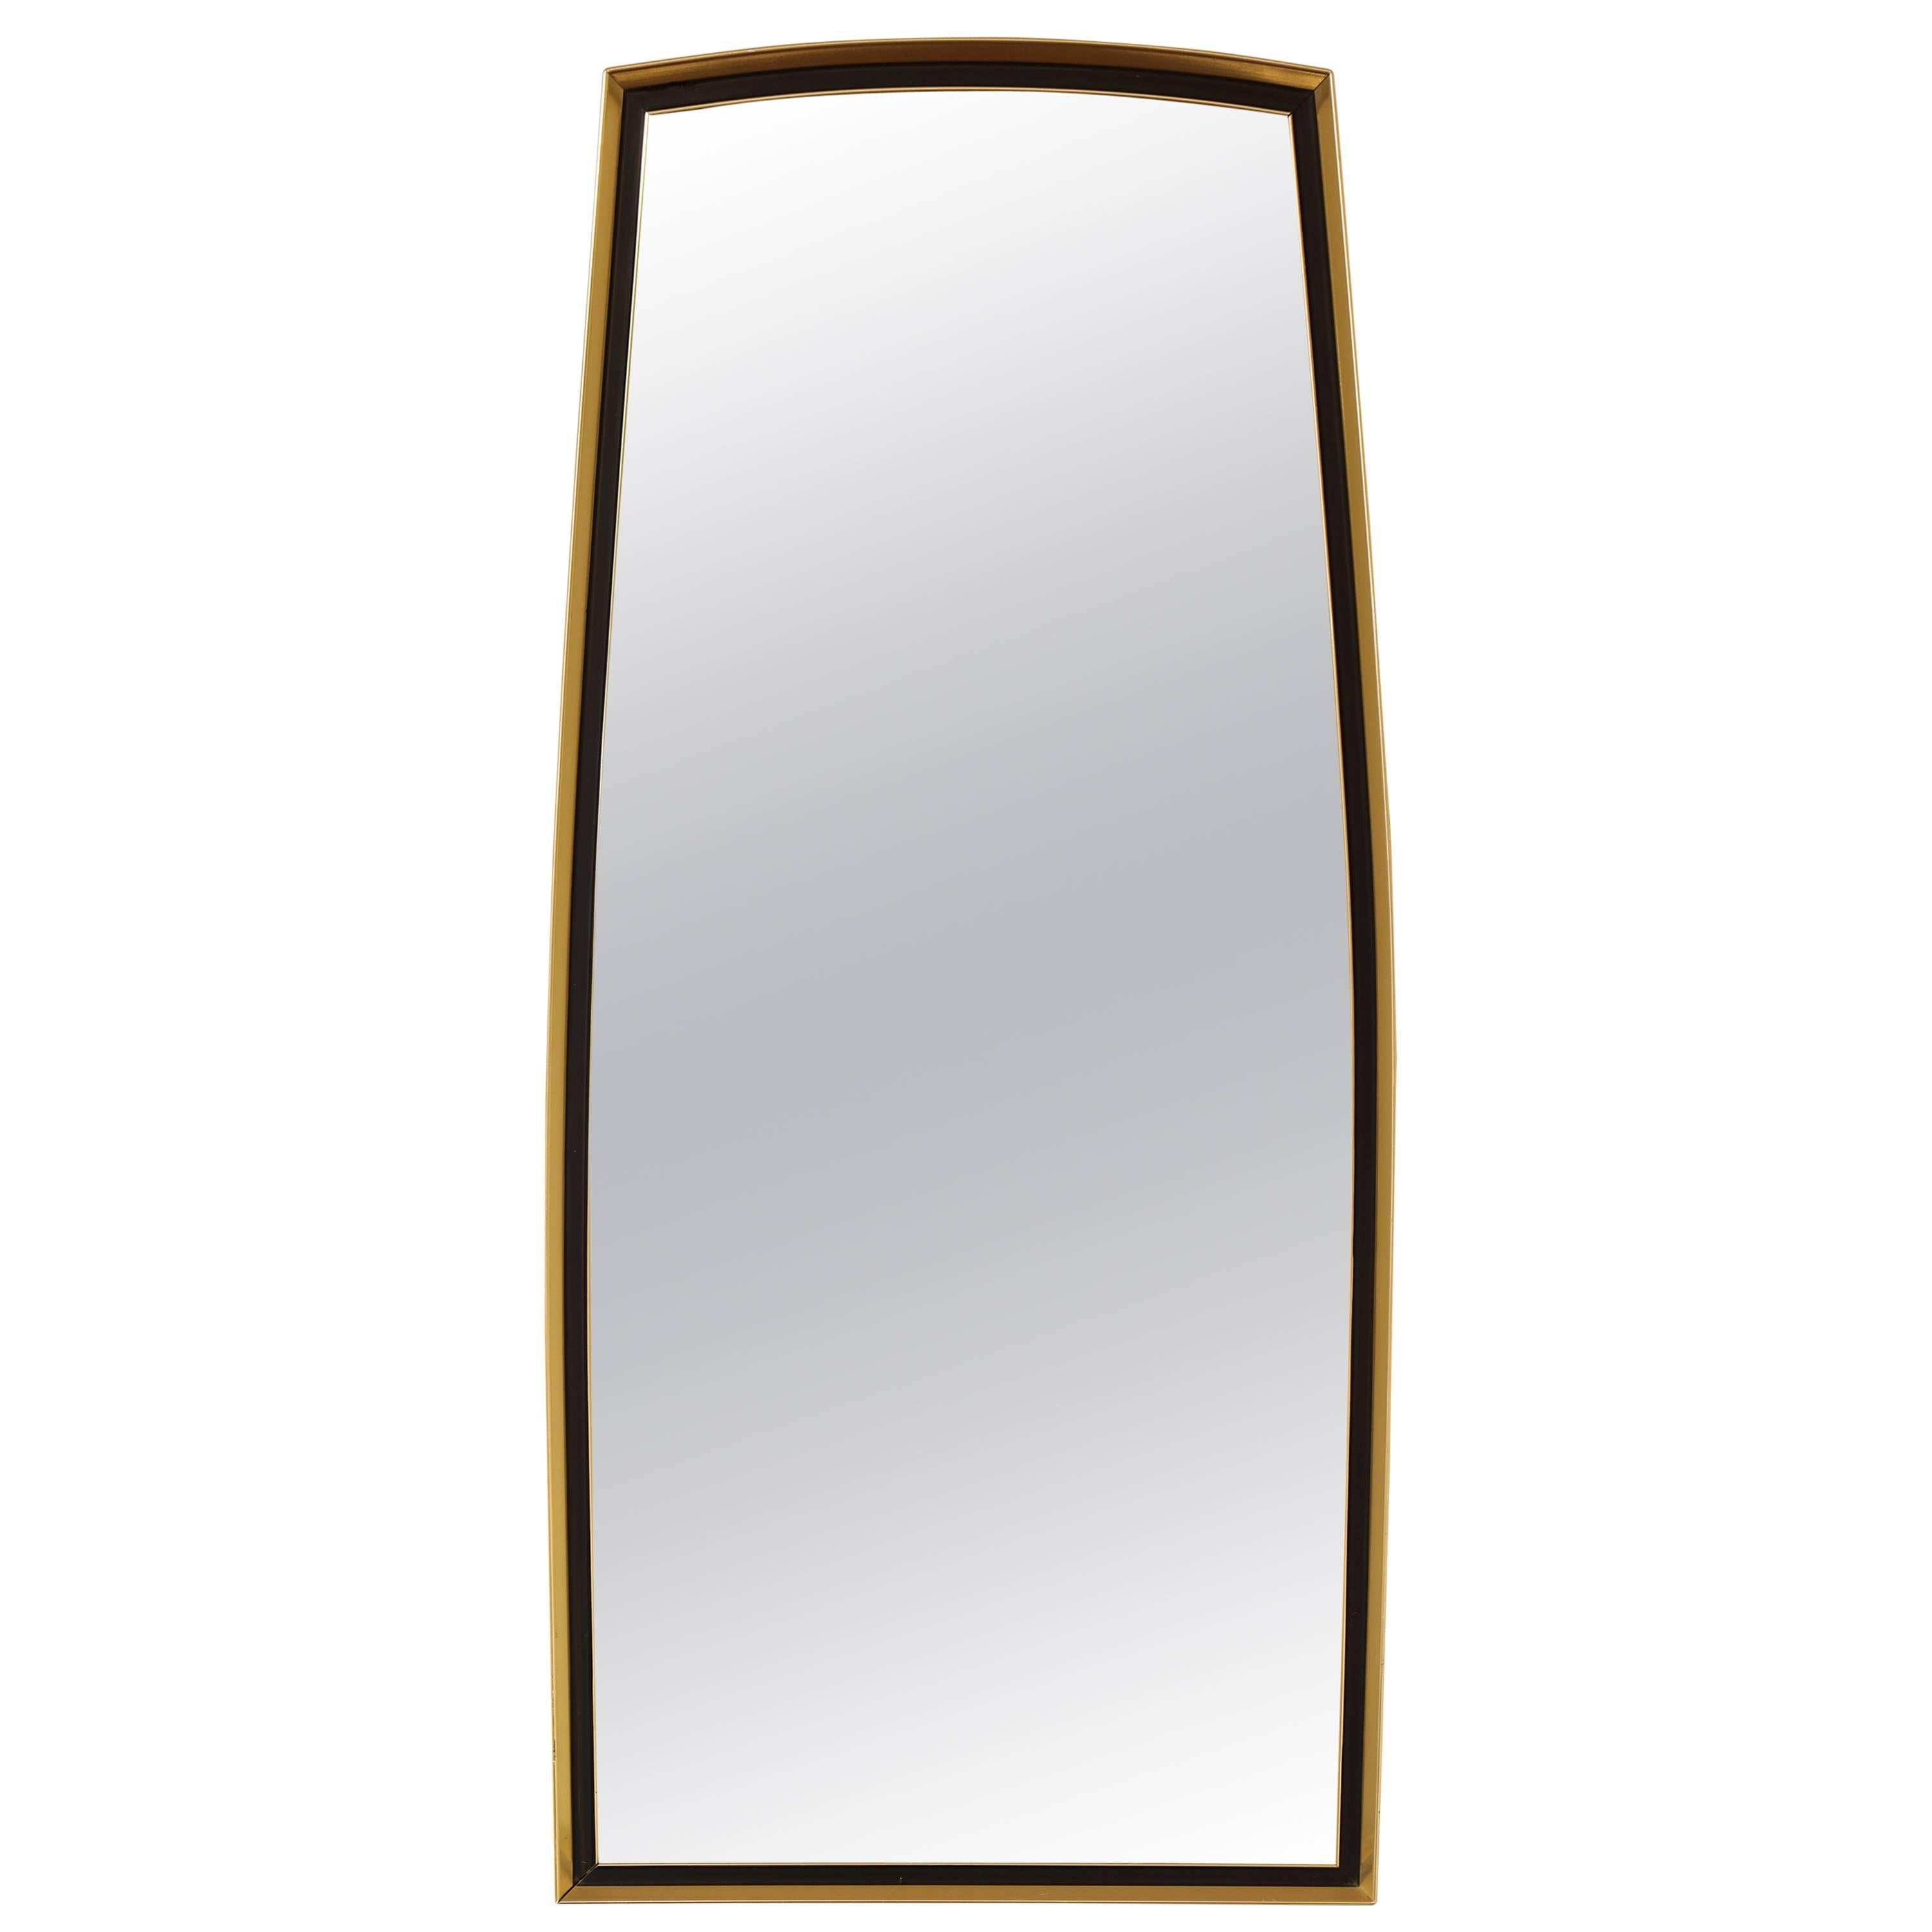 Gold and Metal Shaped Wall Mirror by Turner Manufacturing; Stamped